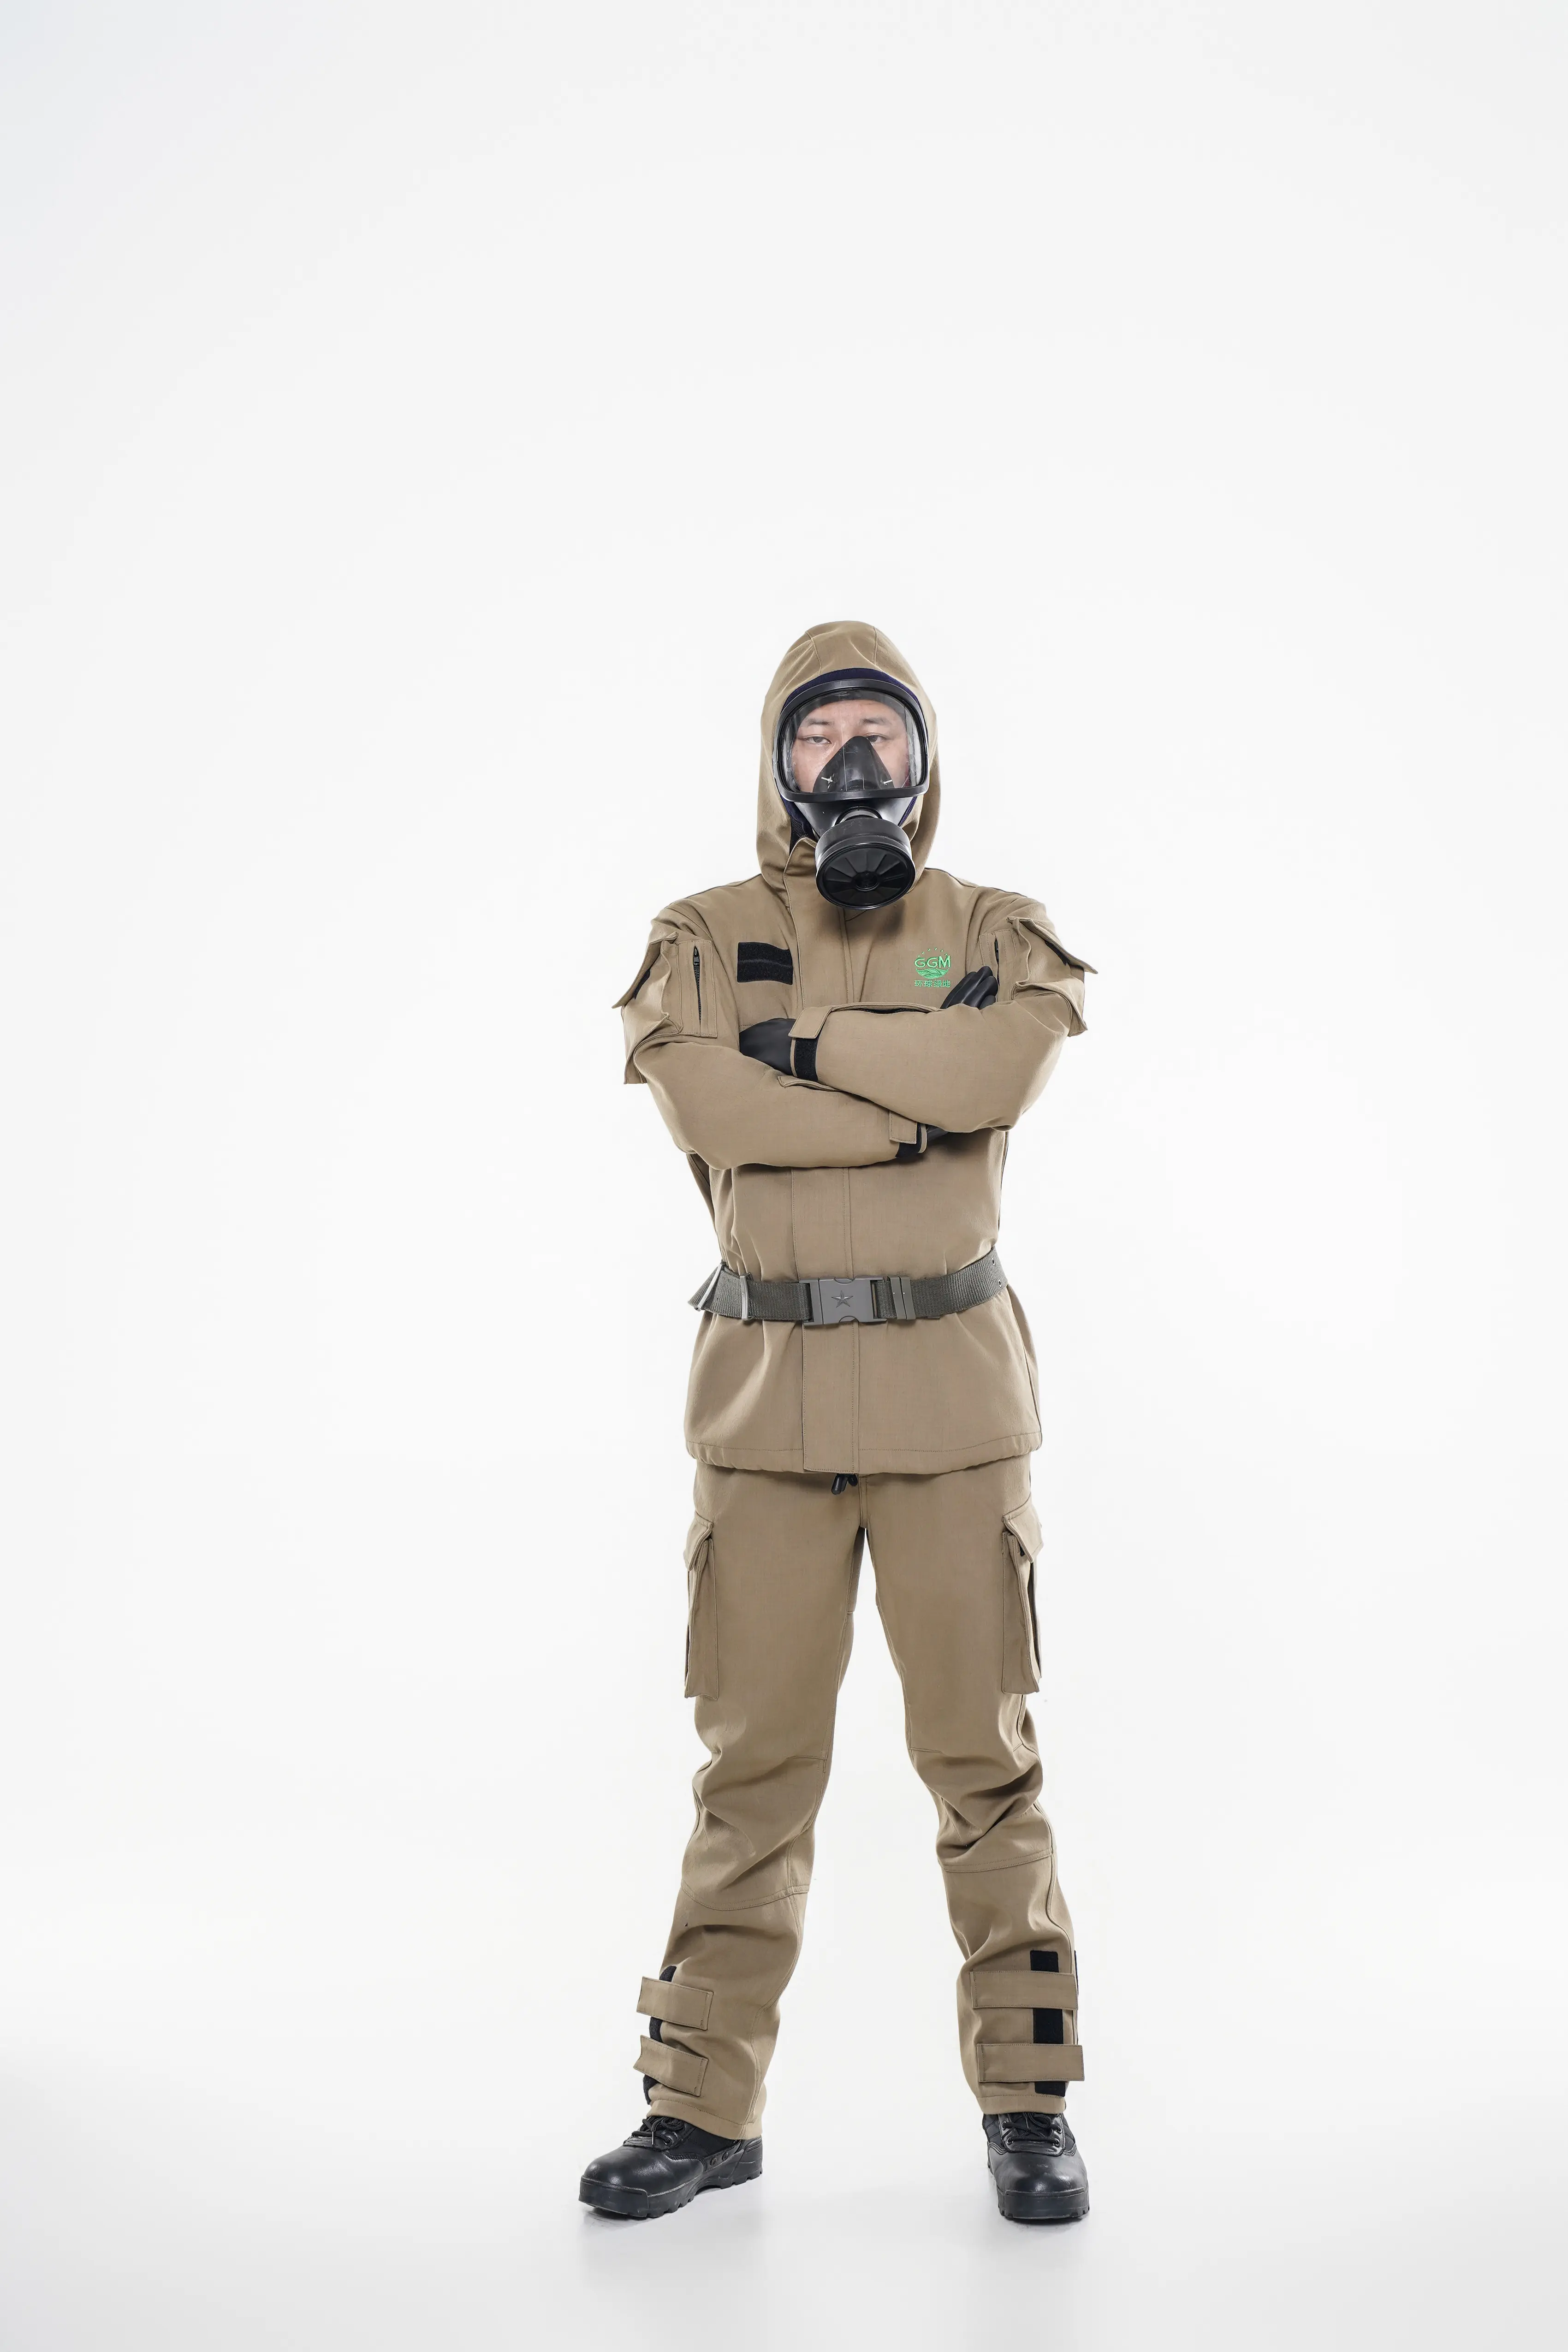 GGM-02 Extended Use CBRN Protection Outfit Up to 30 Days Continuous Wear with Easy Decontamination